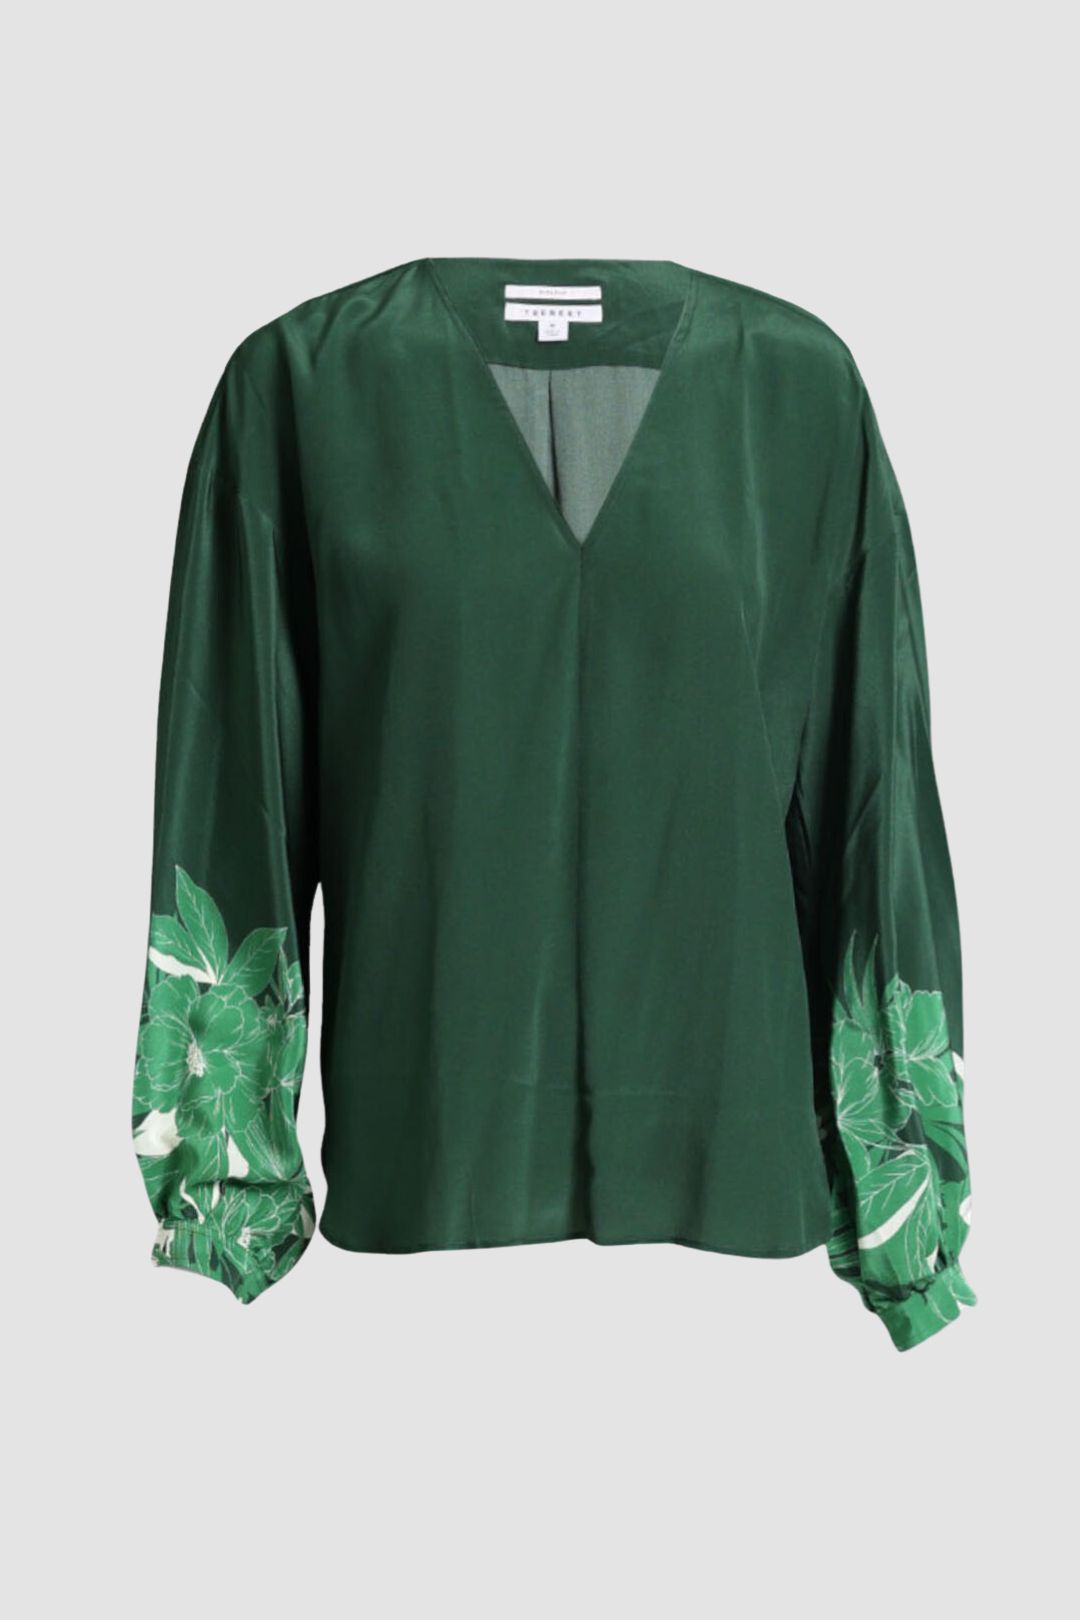 Trenery Green Floral Silk Blouse